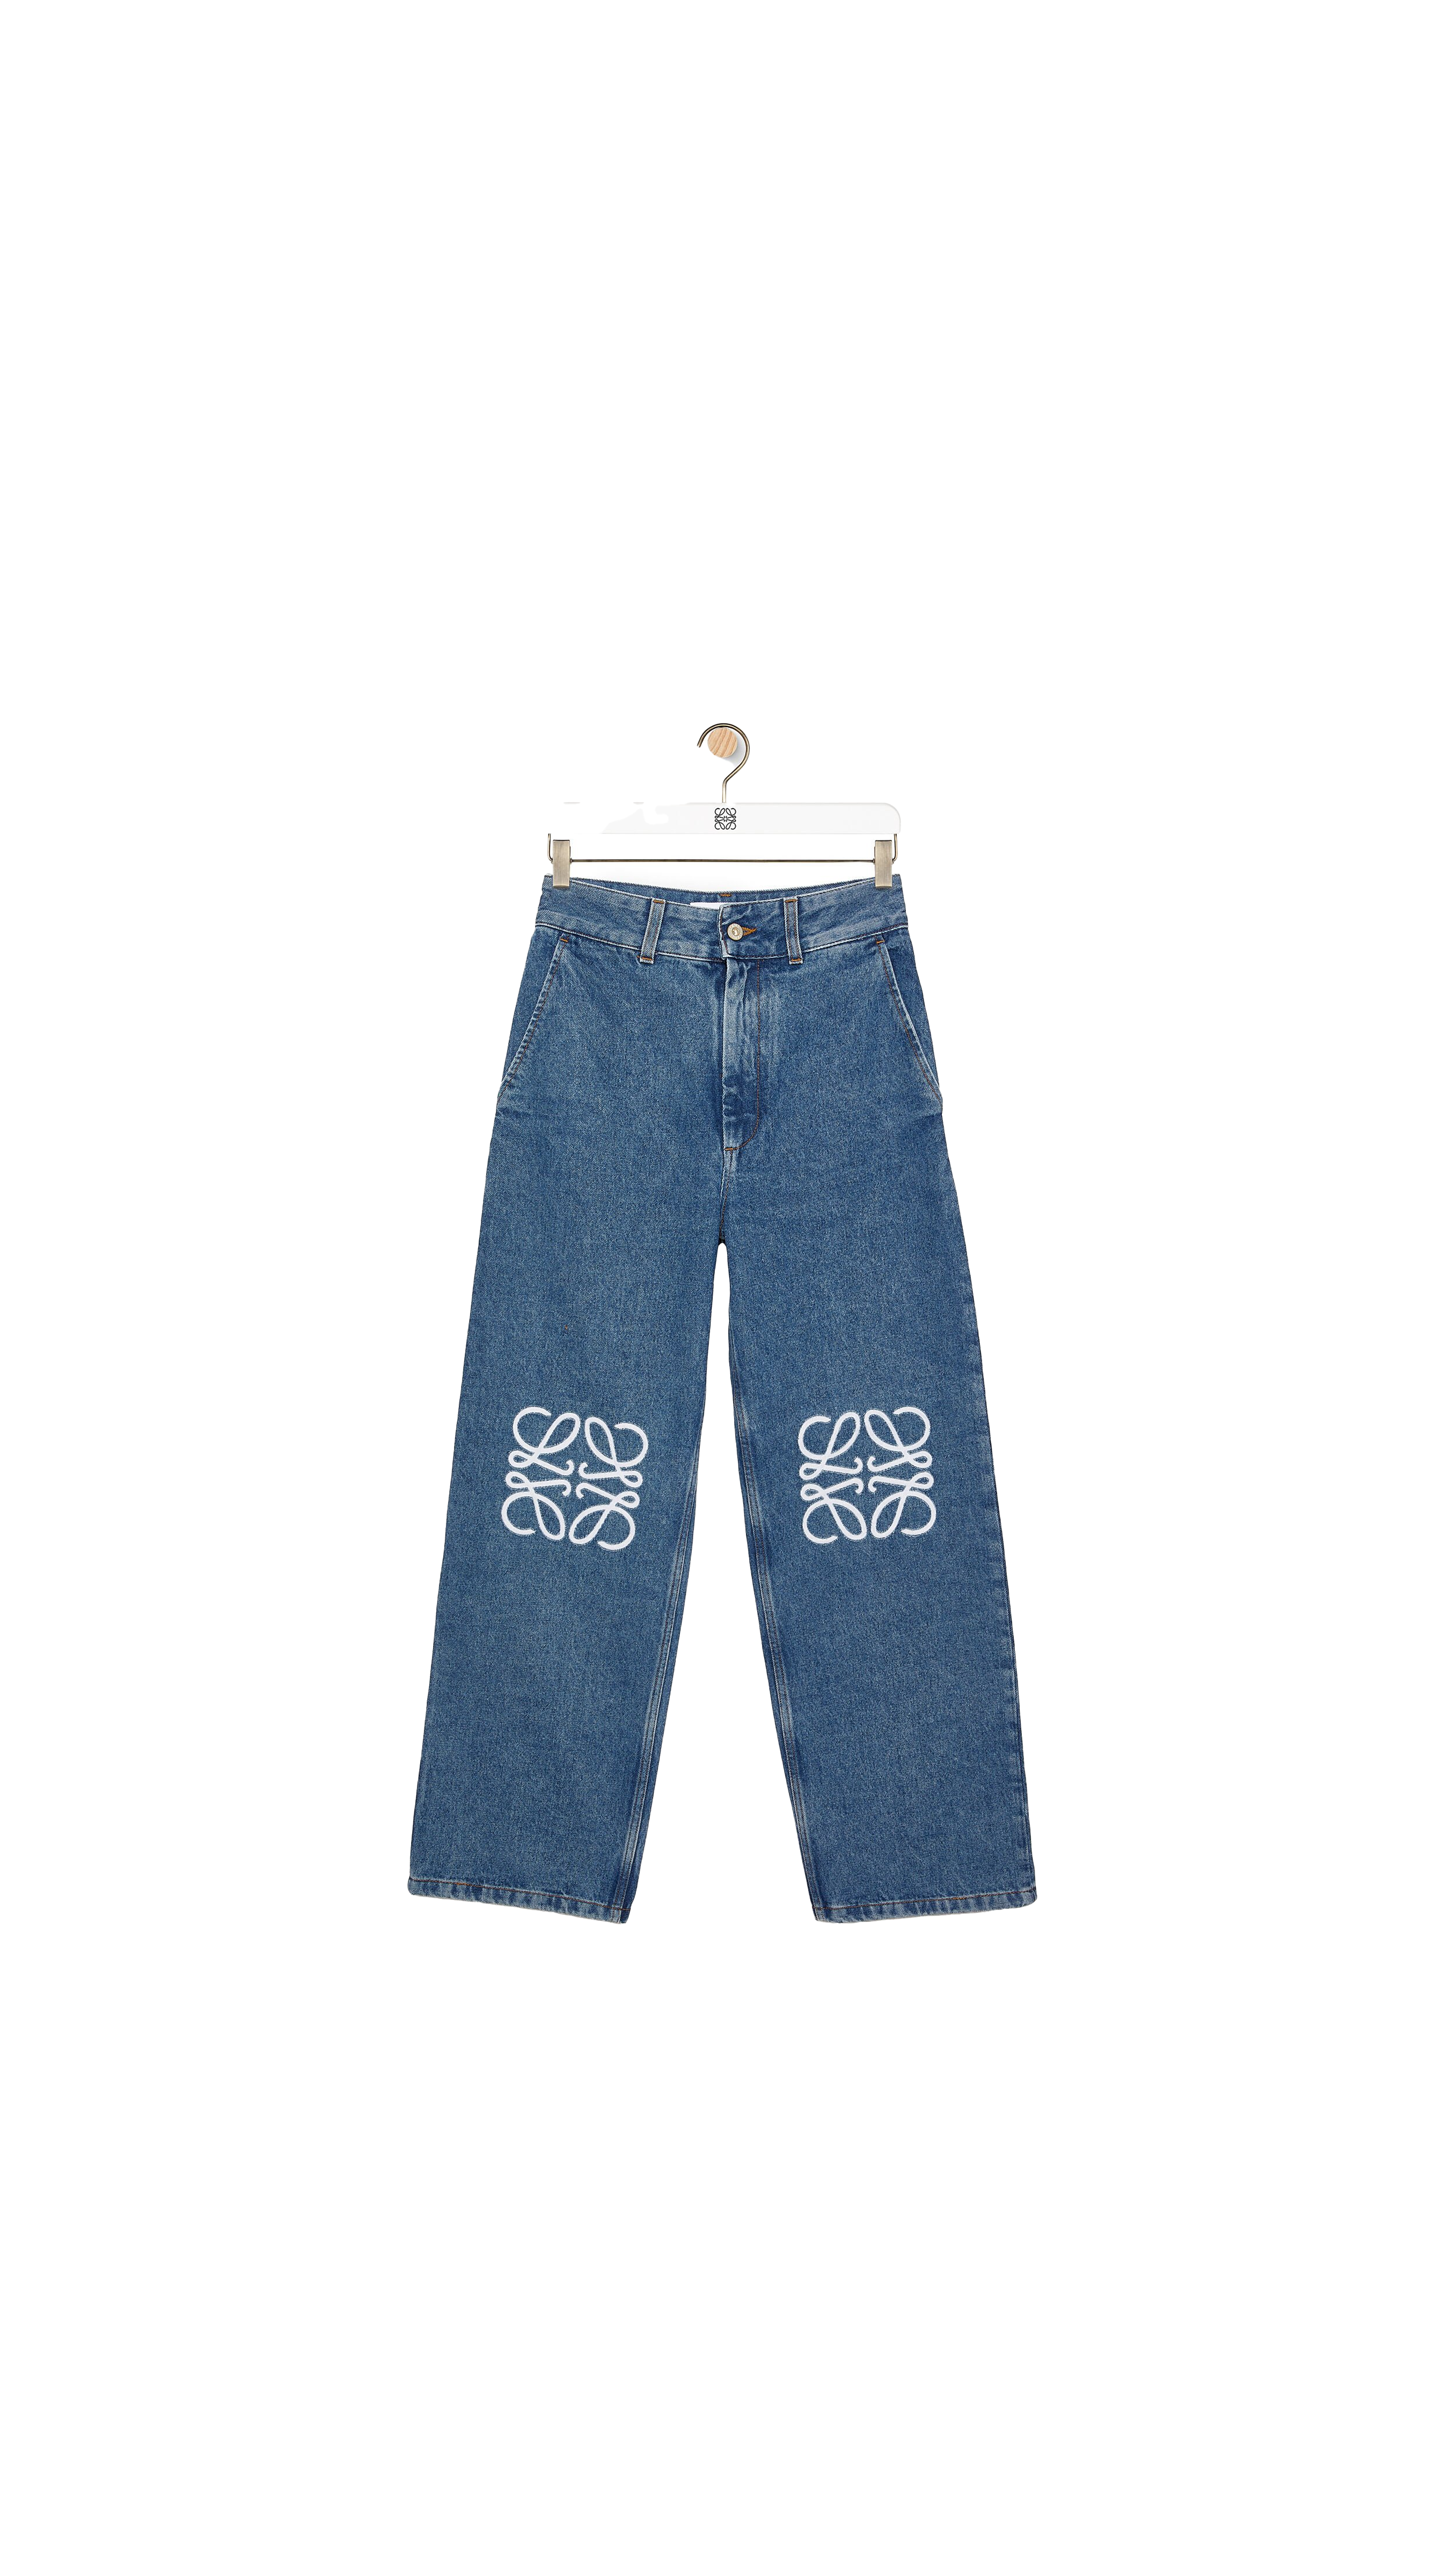 Anagram Baggy Jeans - Blue